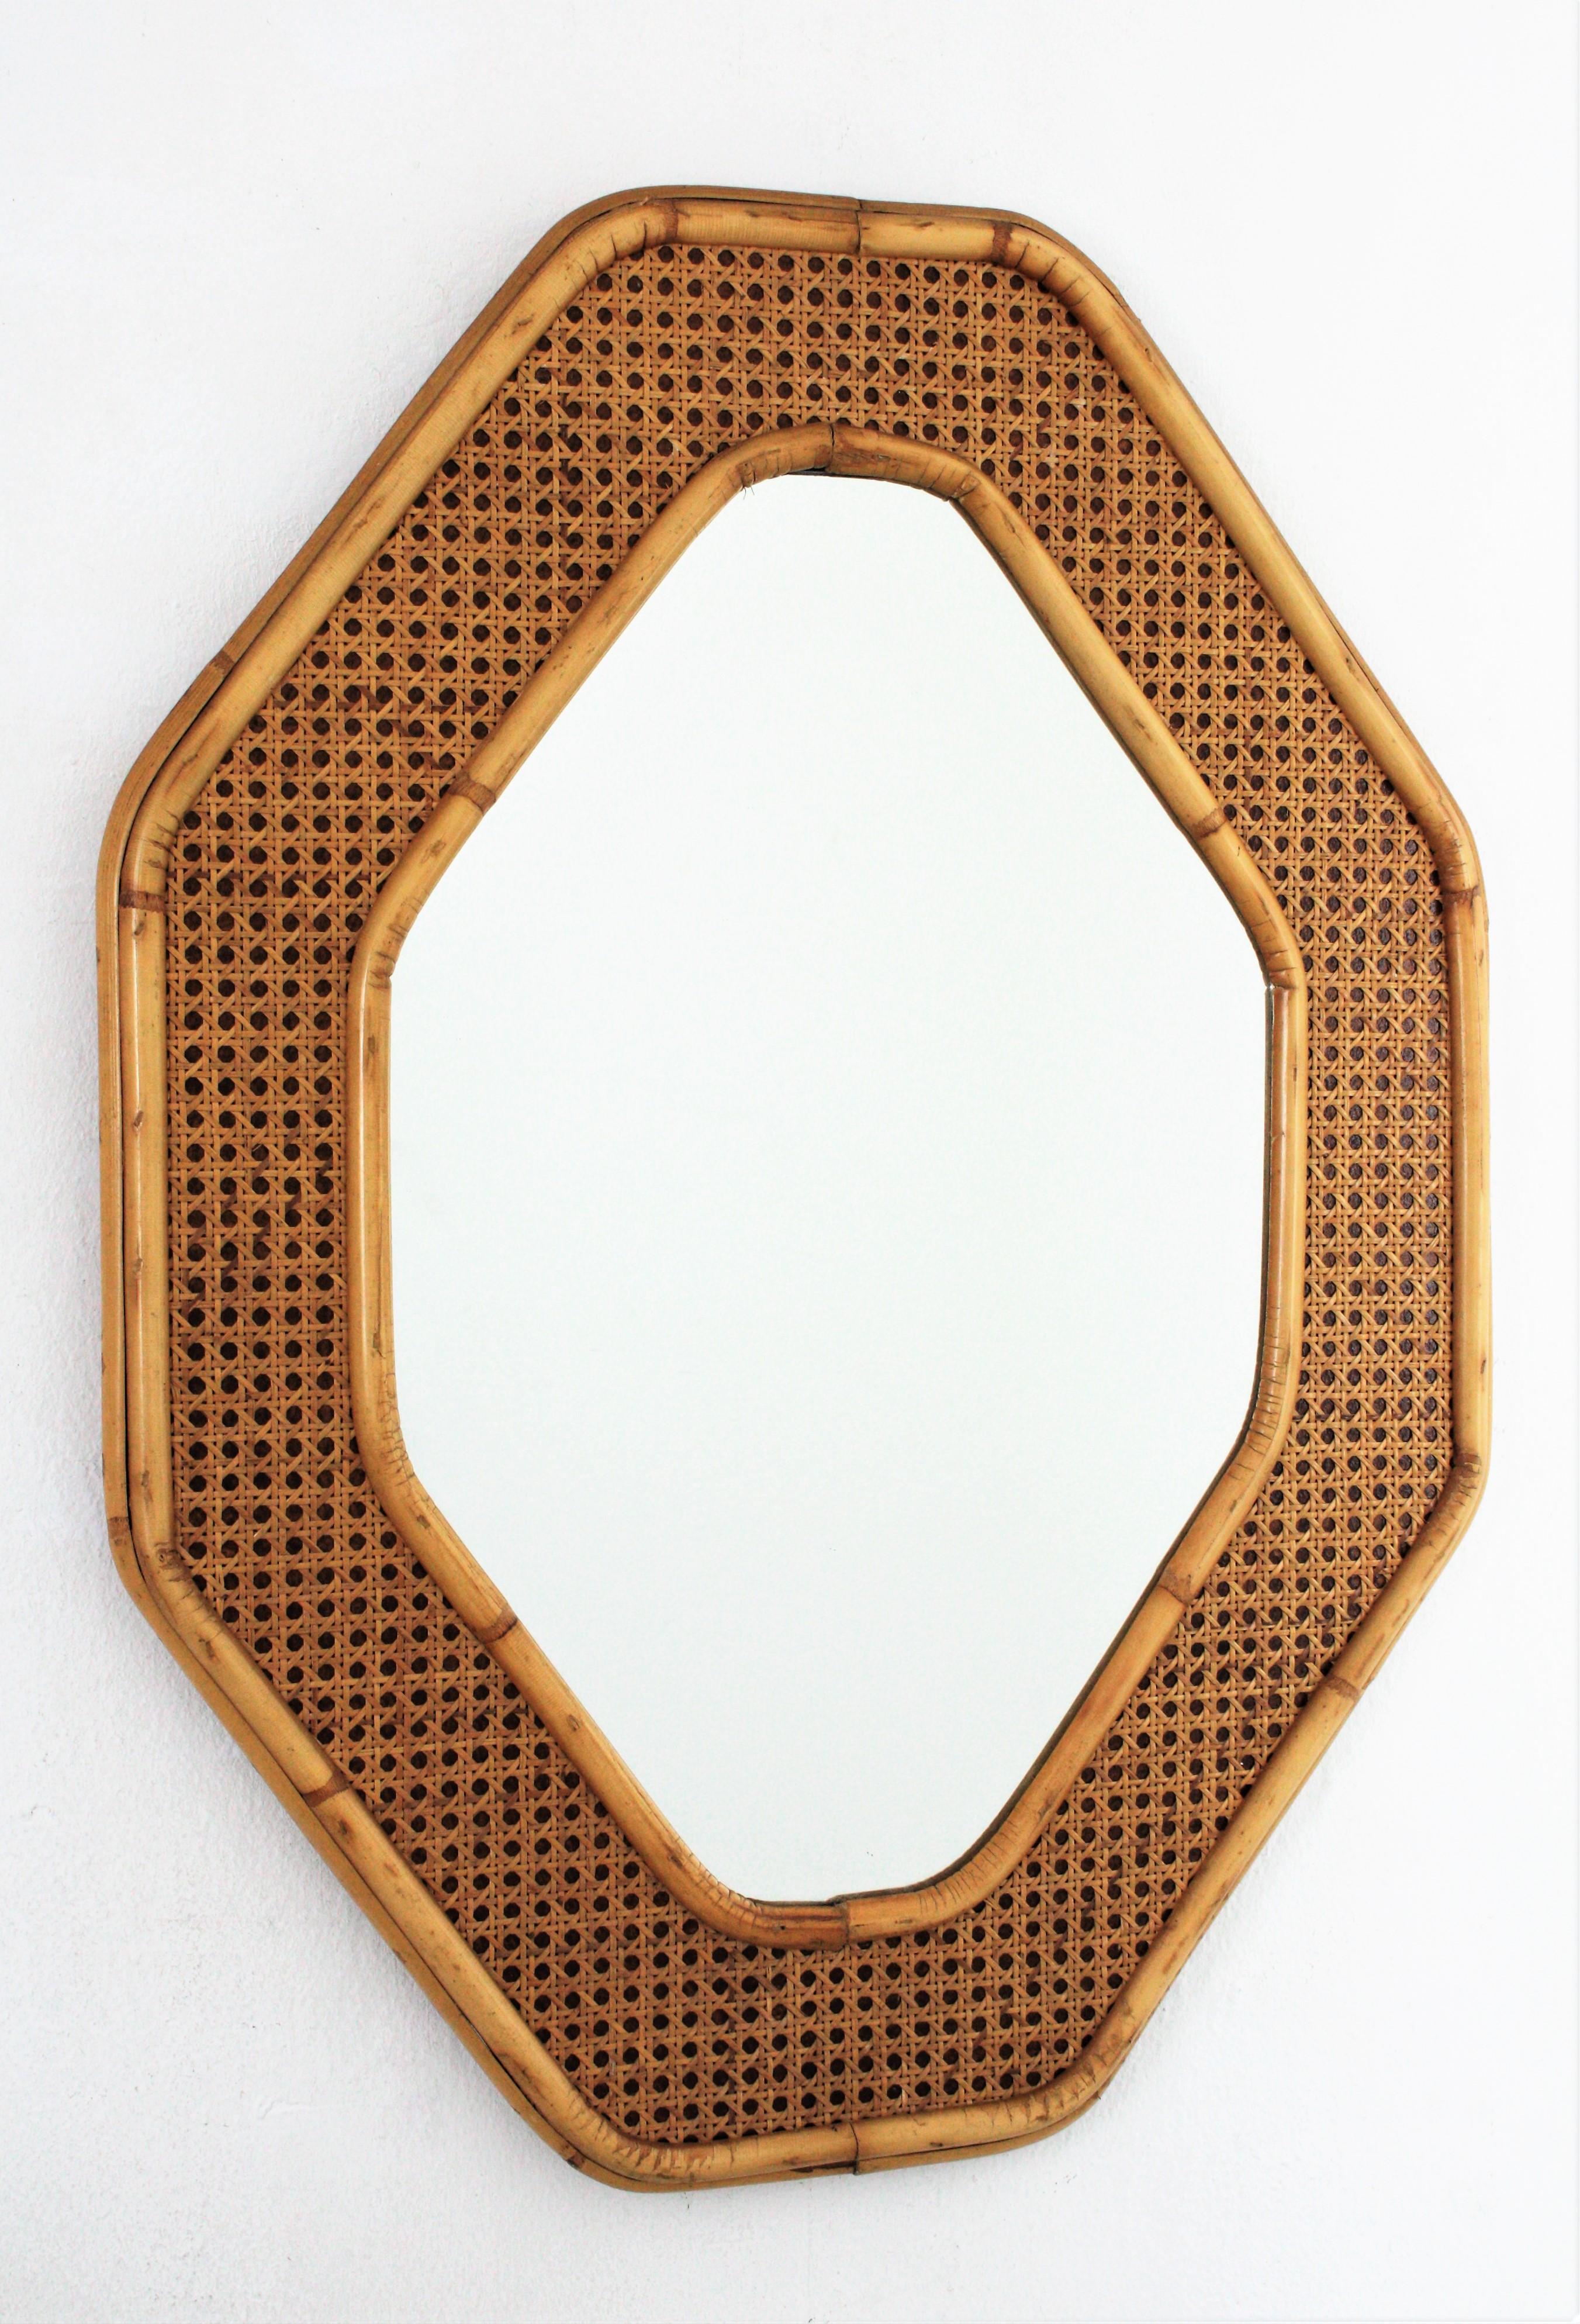 Elegant mid-20th century period woven wicker and bamboo mirror in the style of Christian Dior and Gabriella Crespi. Italy, 1970s.
This rattan/ wicker and bamboo octagonal mirror dates from the 1970s. The structure is made of bamboo, featuring a